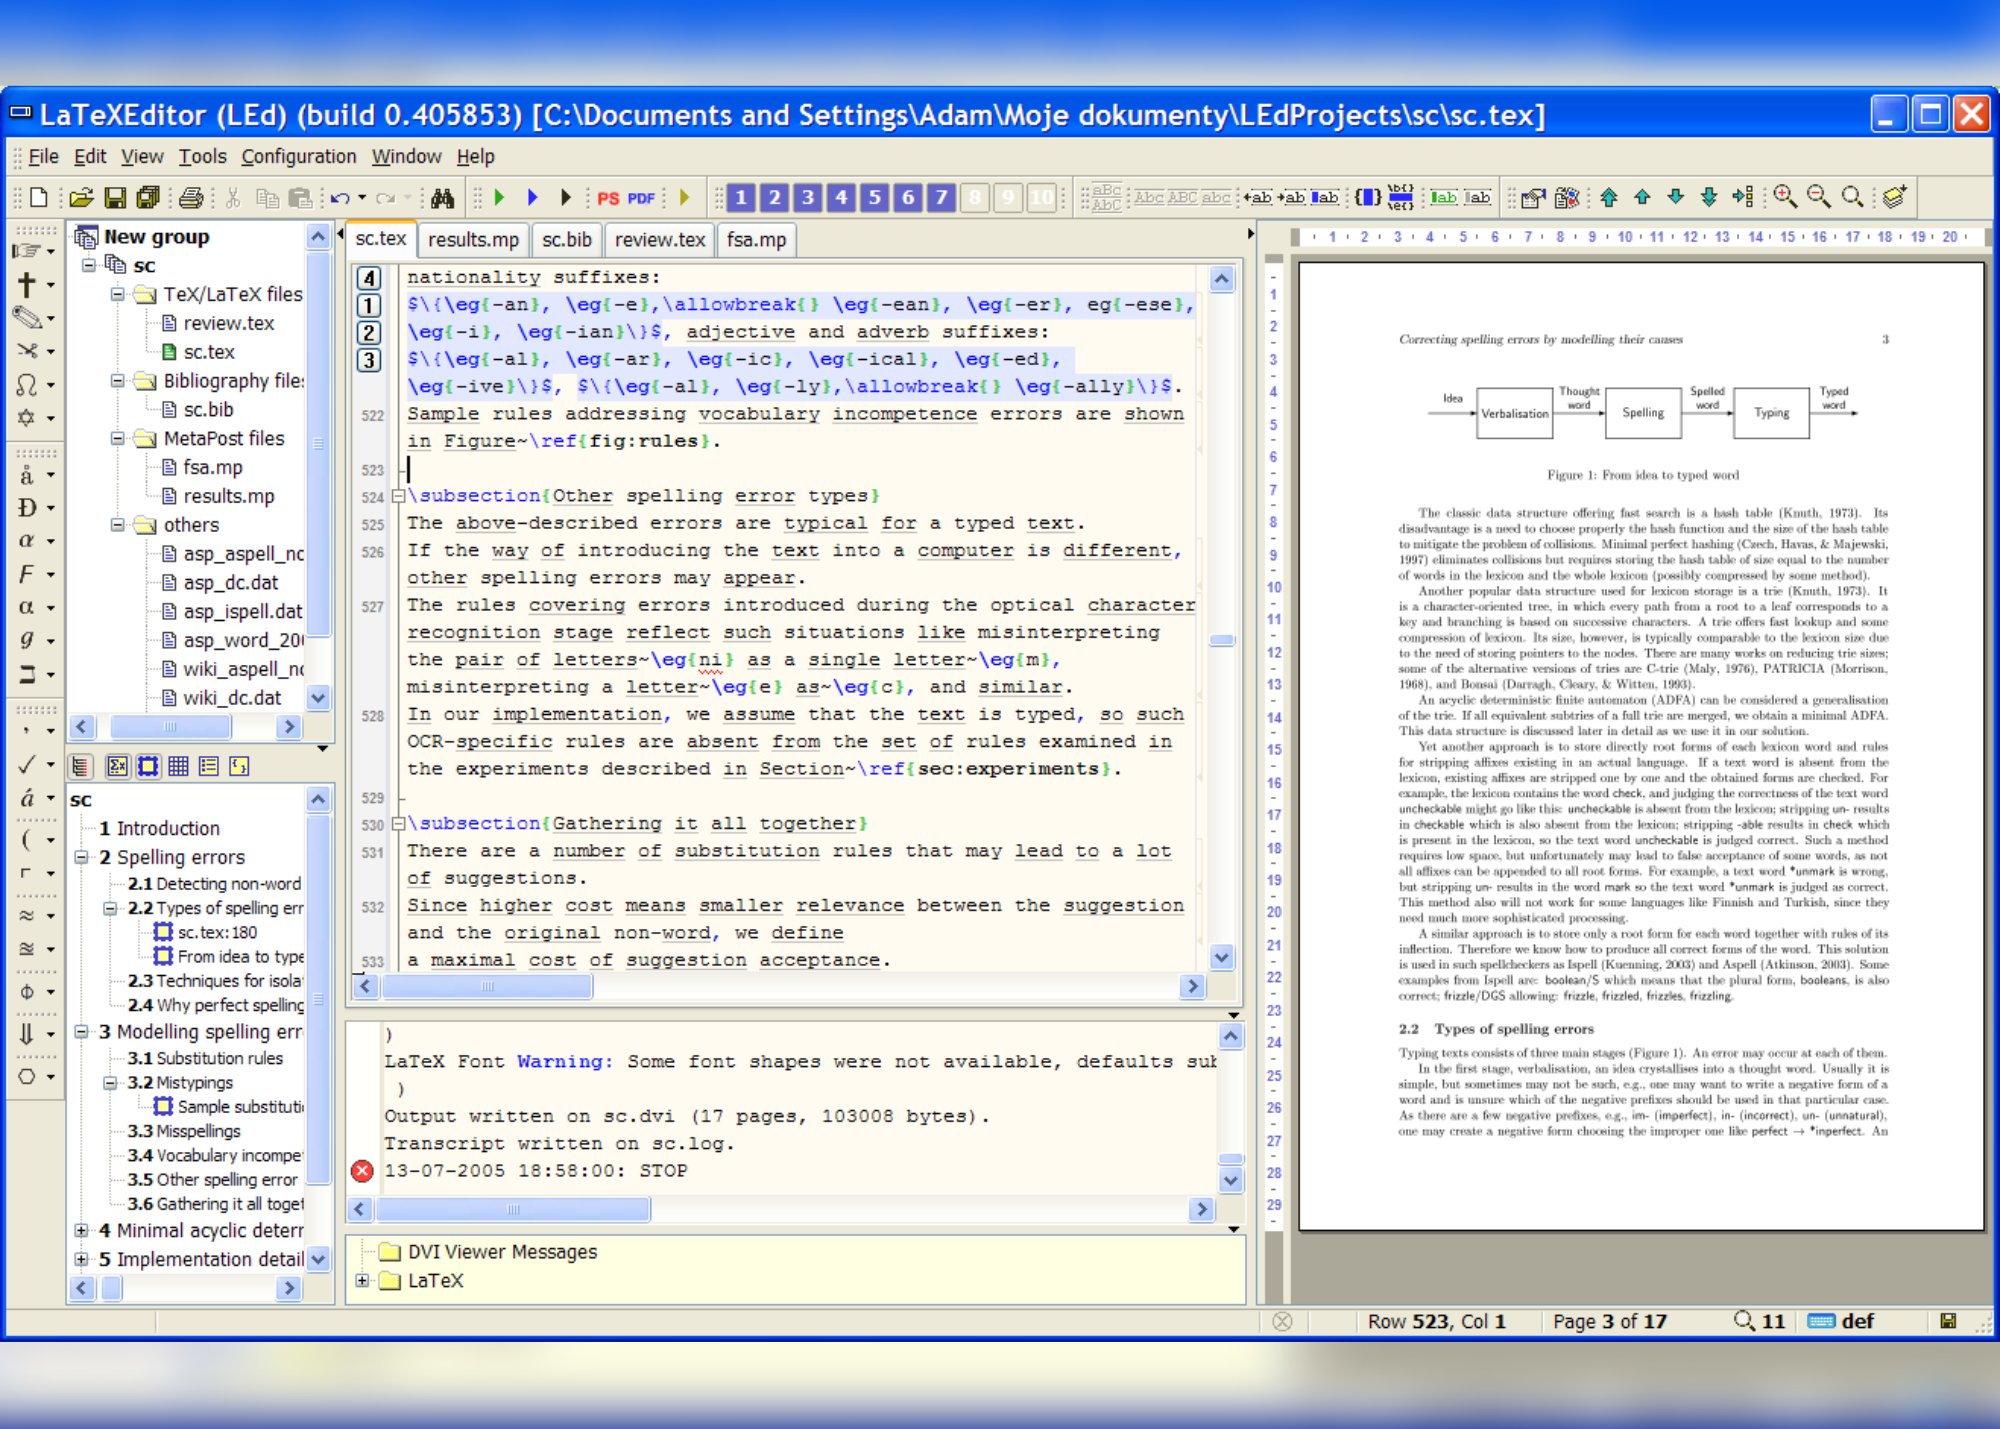 A screenshot showing a LEd Main Window with a draft document on the right side